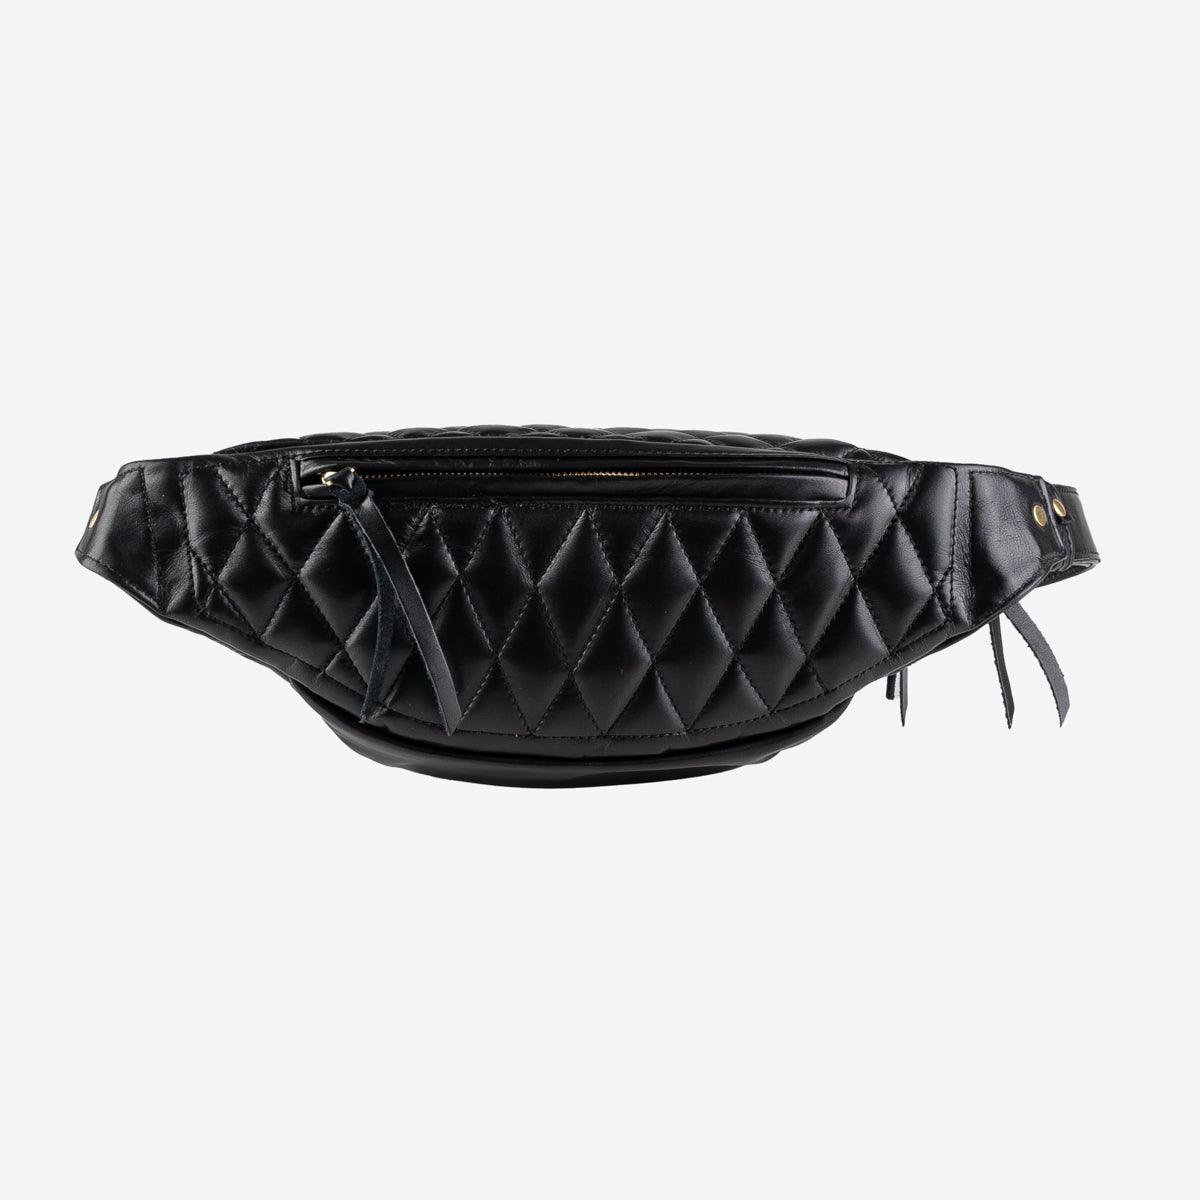 Image showing the IHE-45-BLK - Diamond Stitched Leather Waist Bag - Black which is a Others described by the following info Accessories, Iron Heart, New, Others, Released and sold on the IRON HEART GERMANY online store